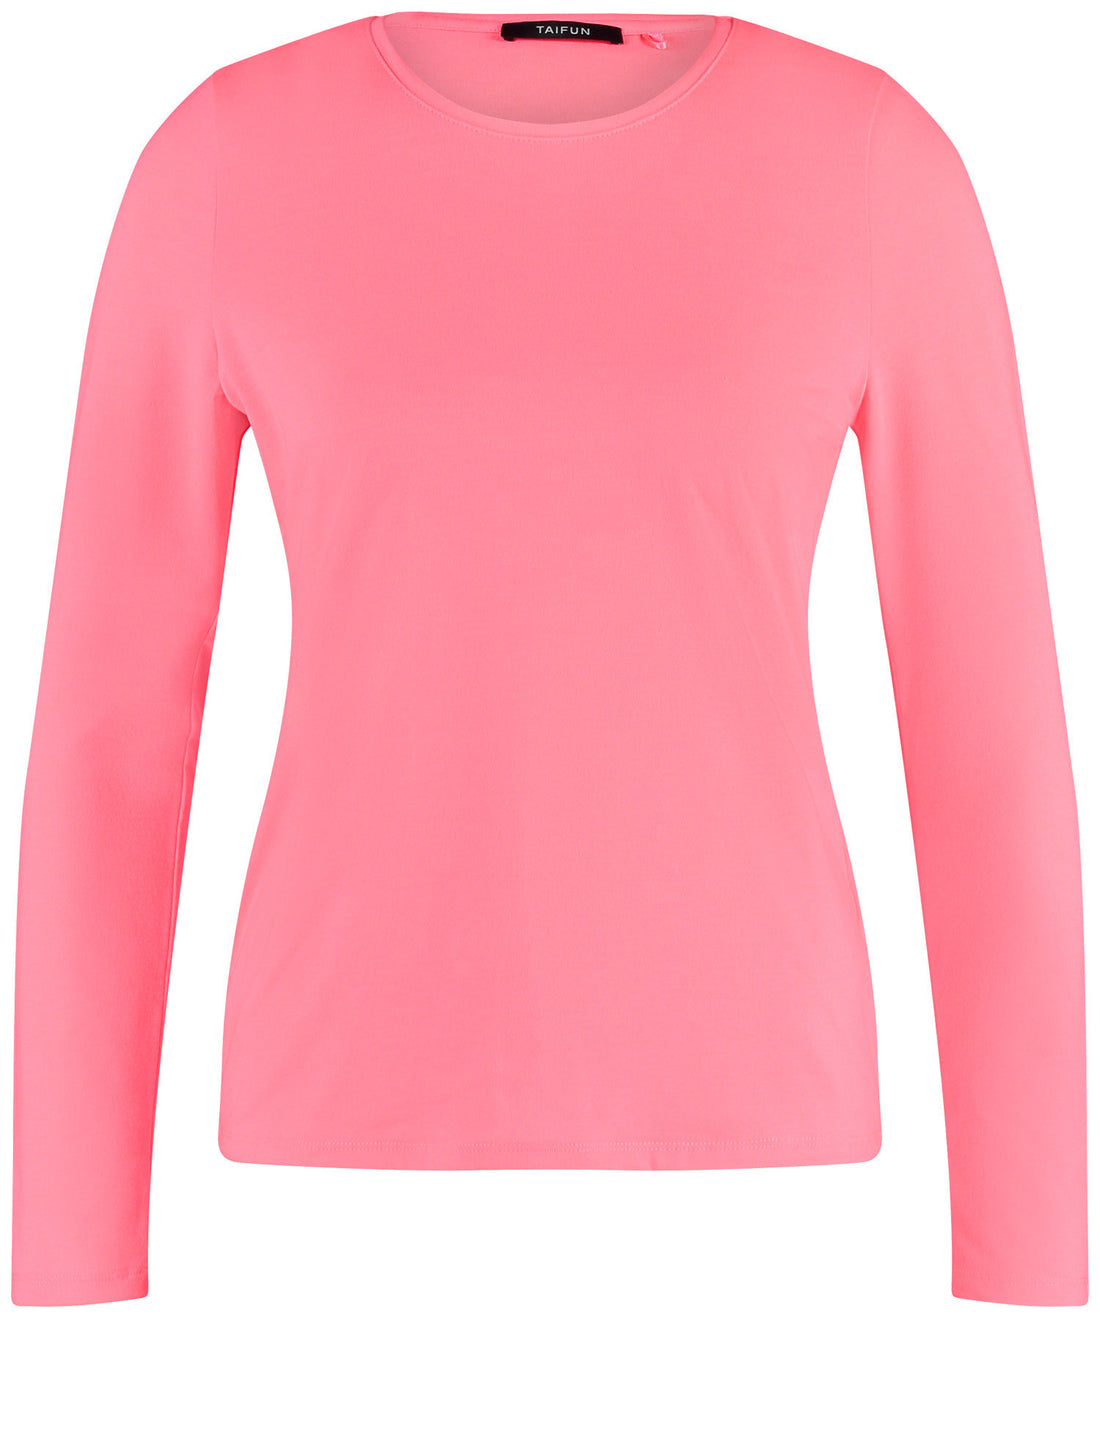 Basic Long Sleeve Top With A Round Neckline_571305-16116_3430_02